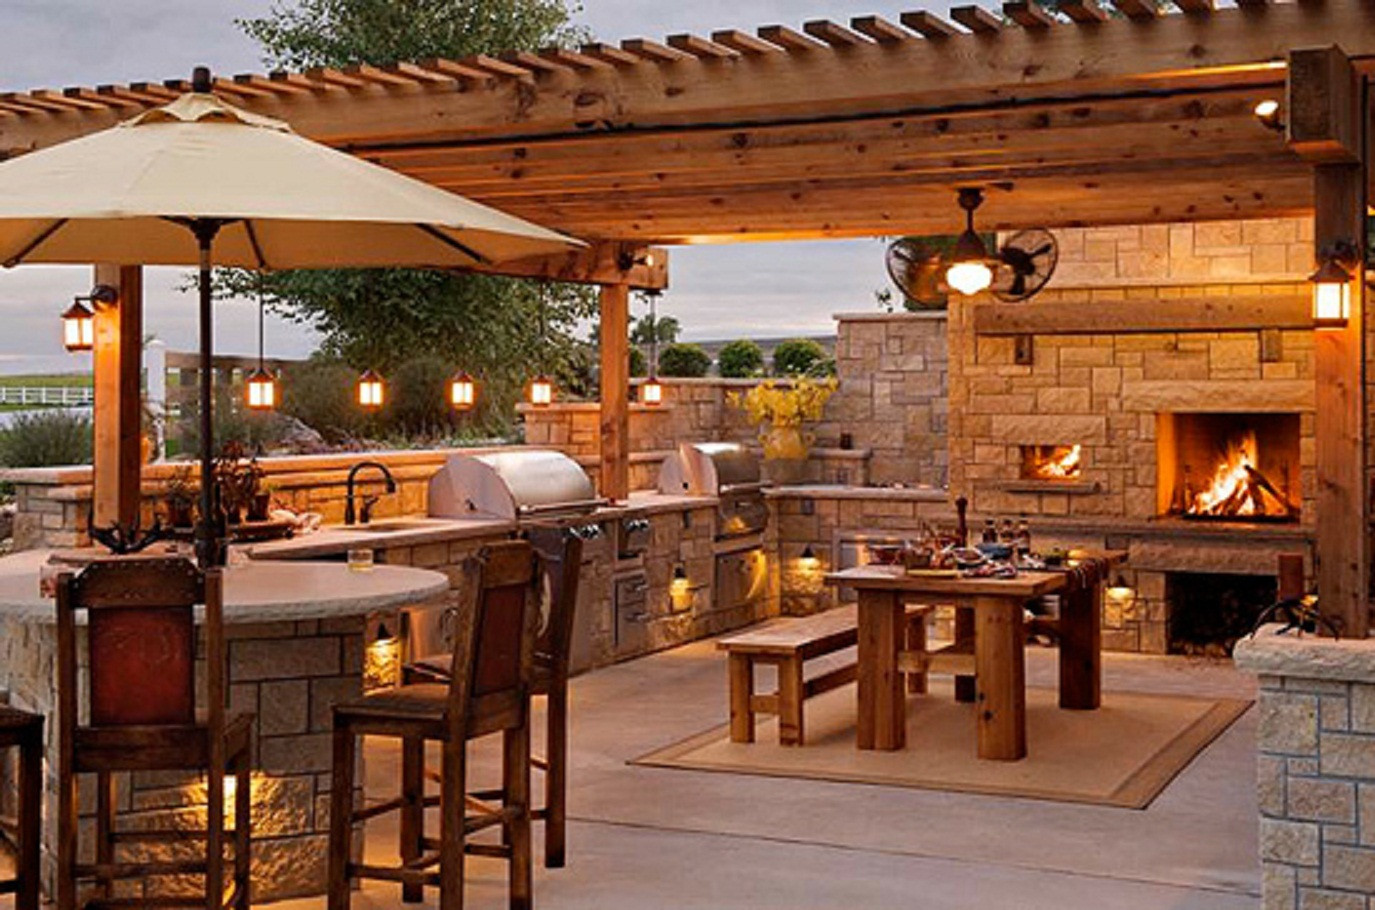 Outdoor Kitchen Pics
 How to Design Your Perfect Outdoor kitchen Outdoor